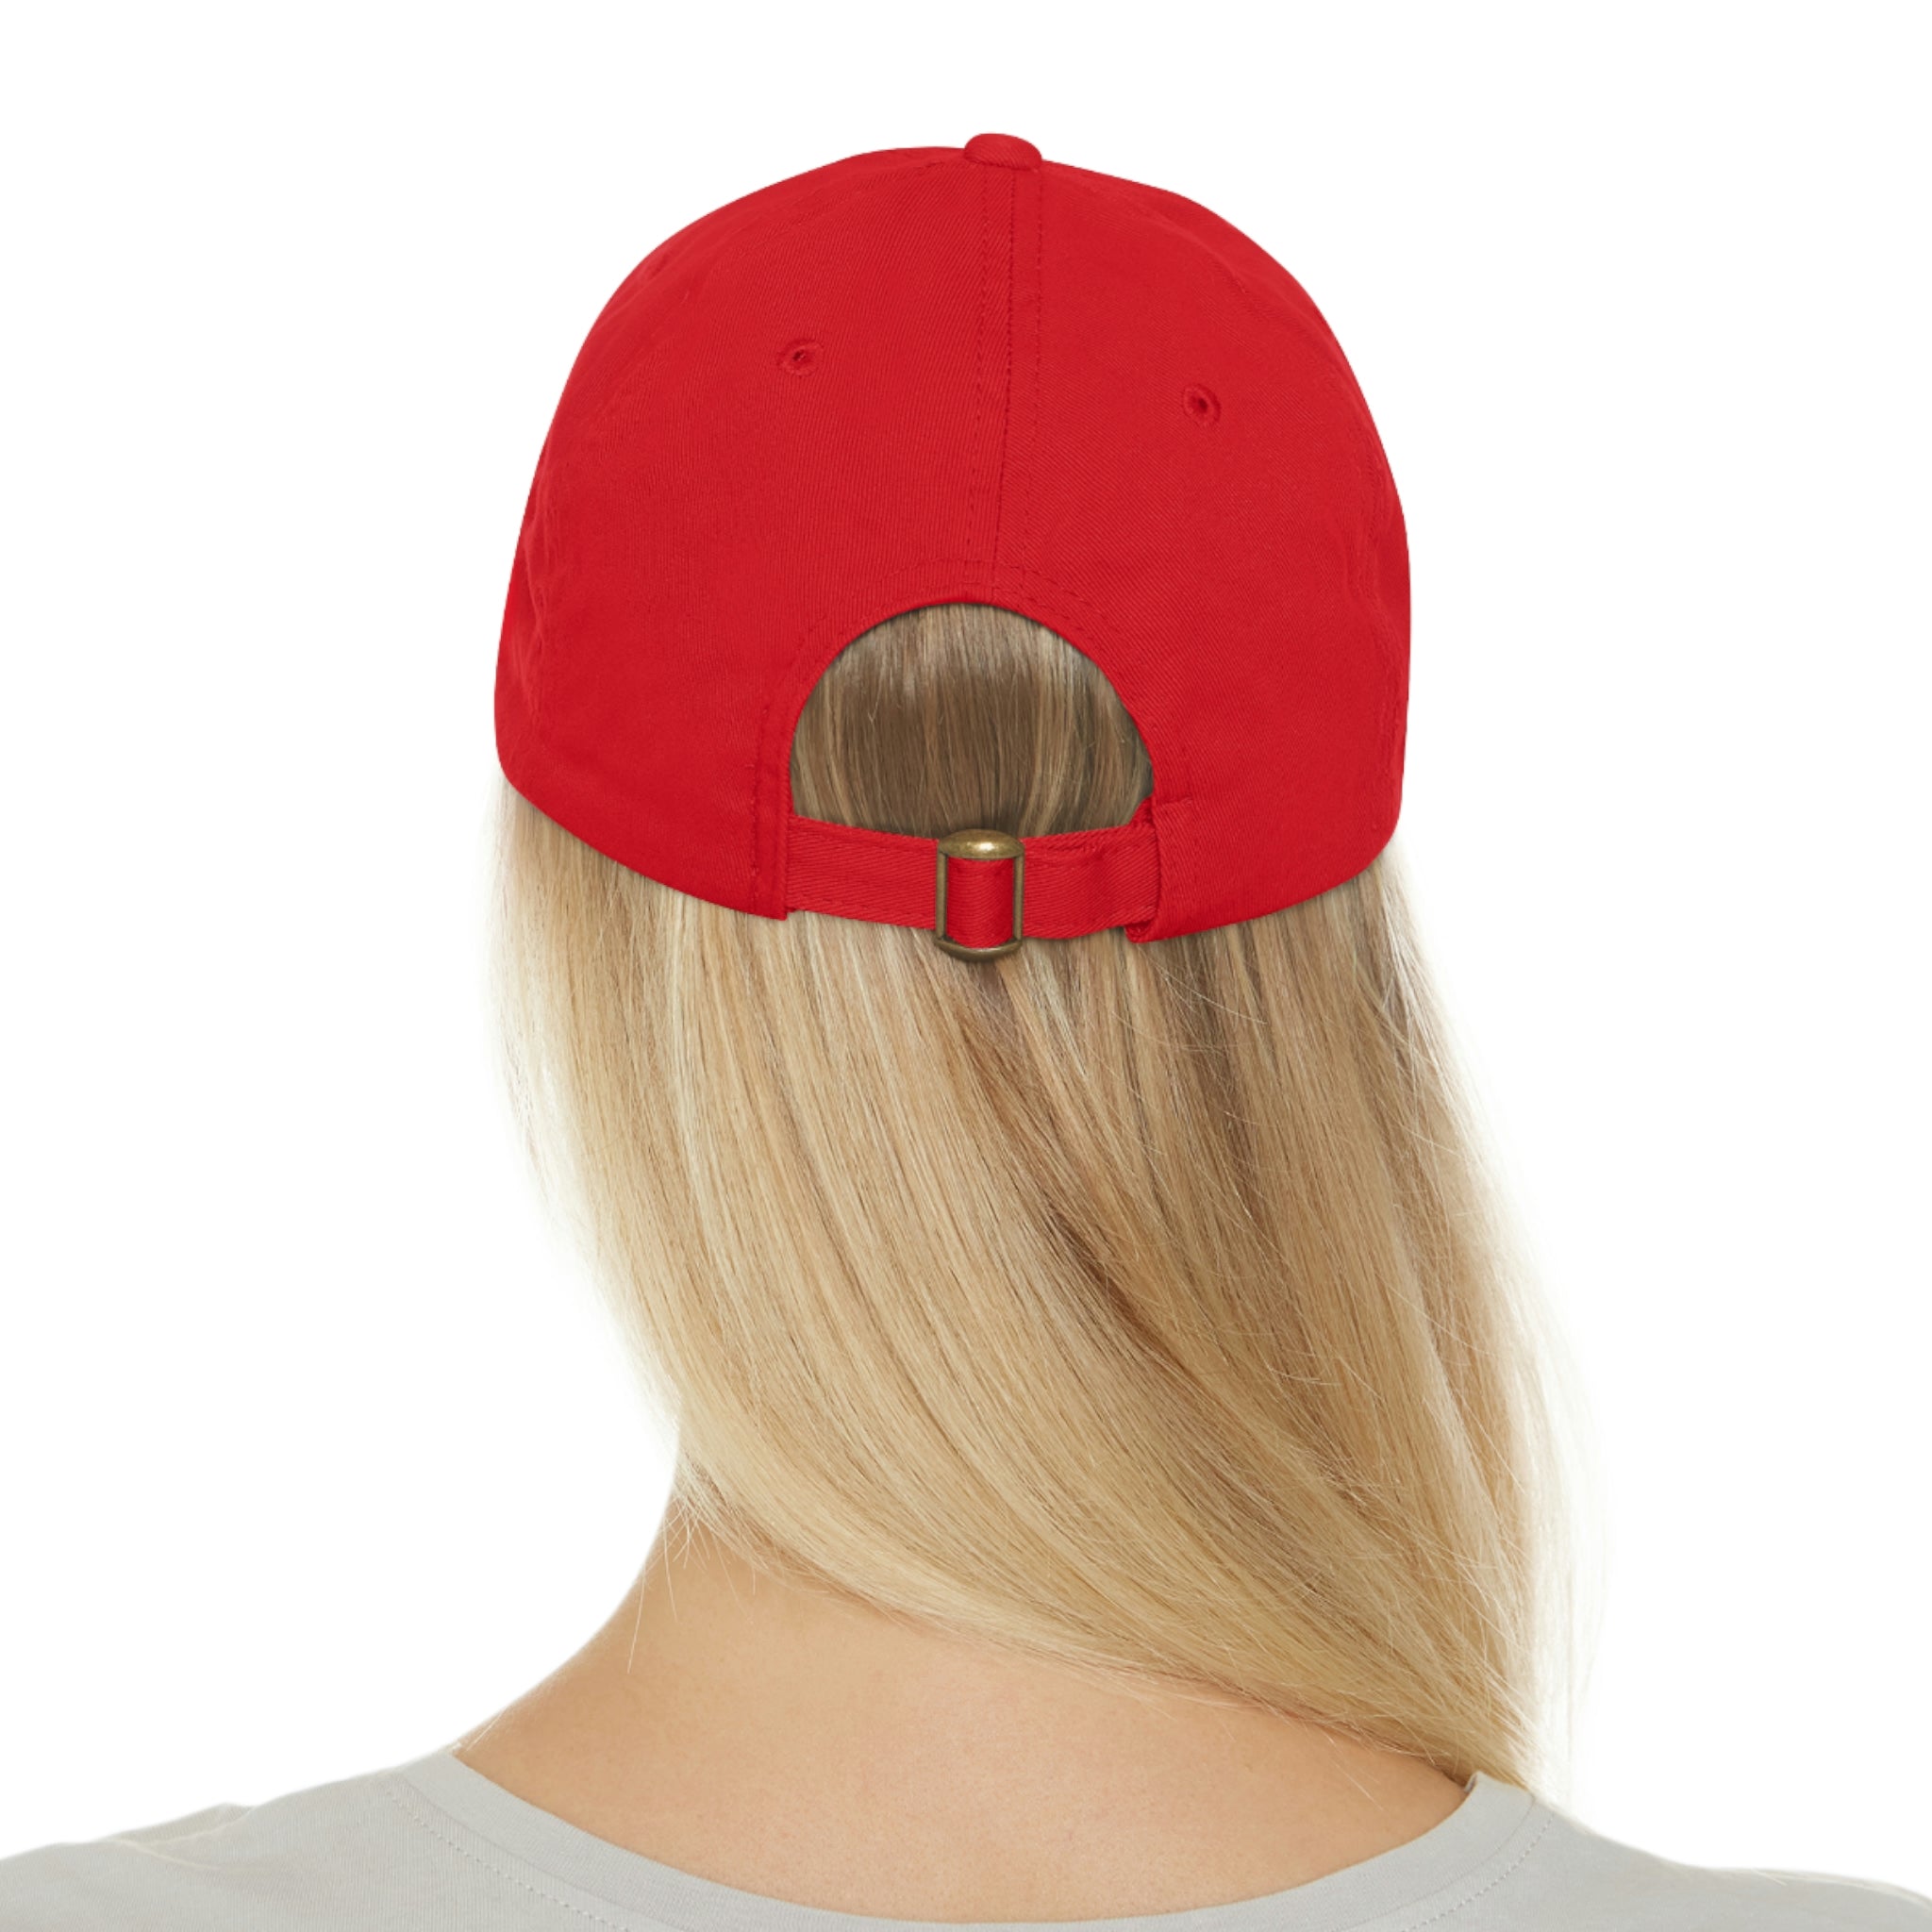 Inspire Hat with Leather Patch